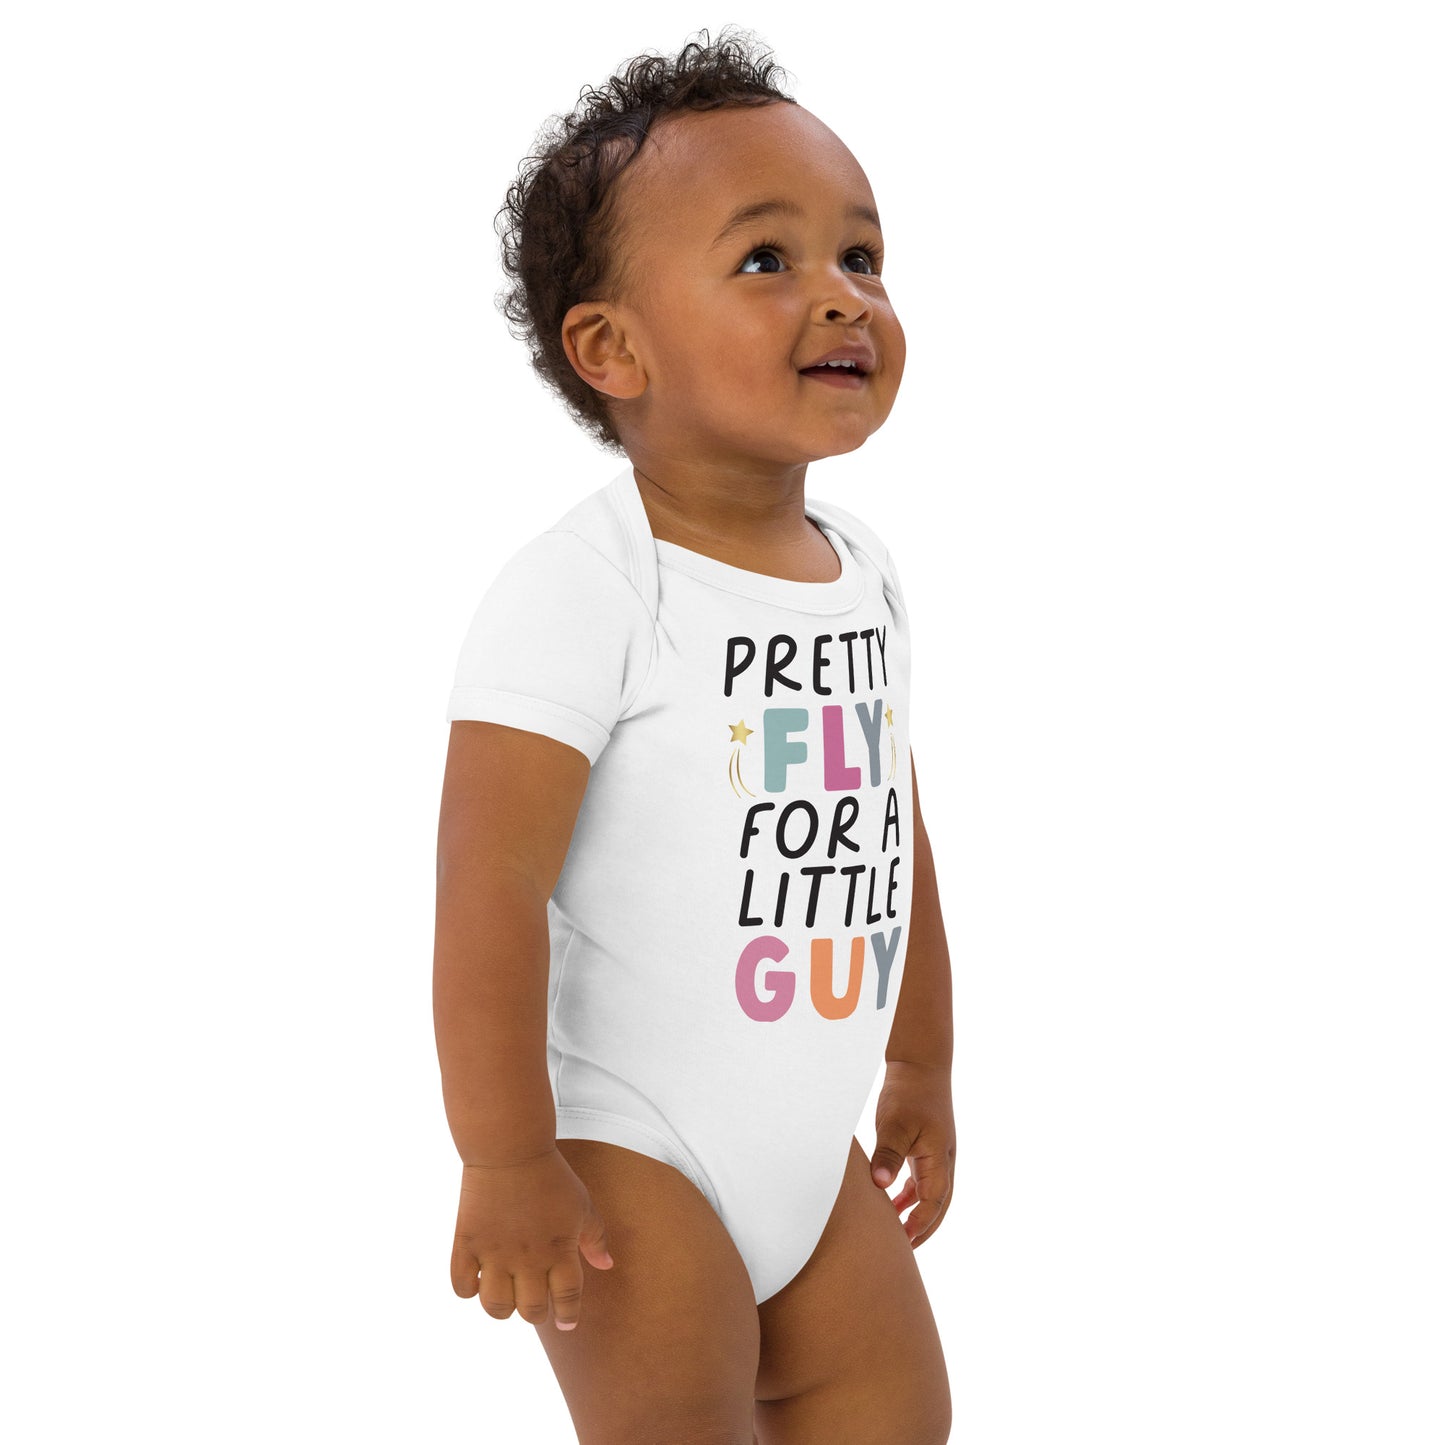 Organic cotton baby bodysuit - Pretty Fly For a Little Guy